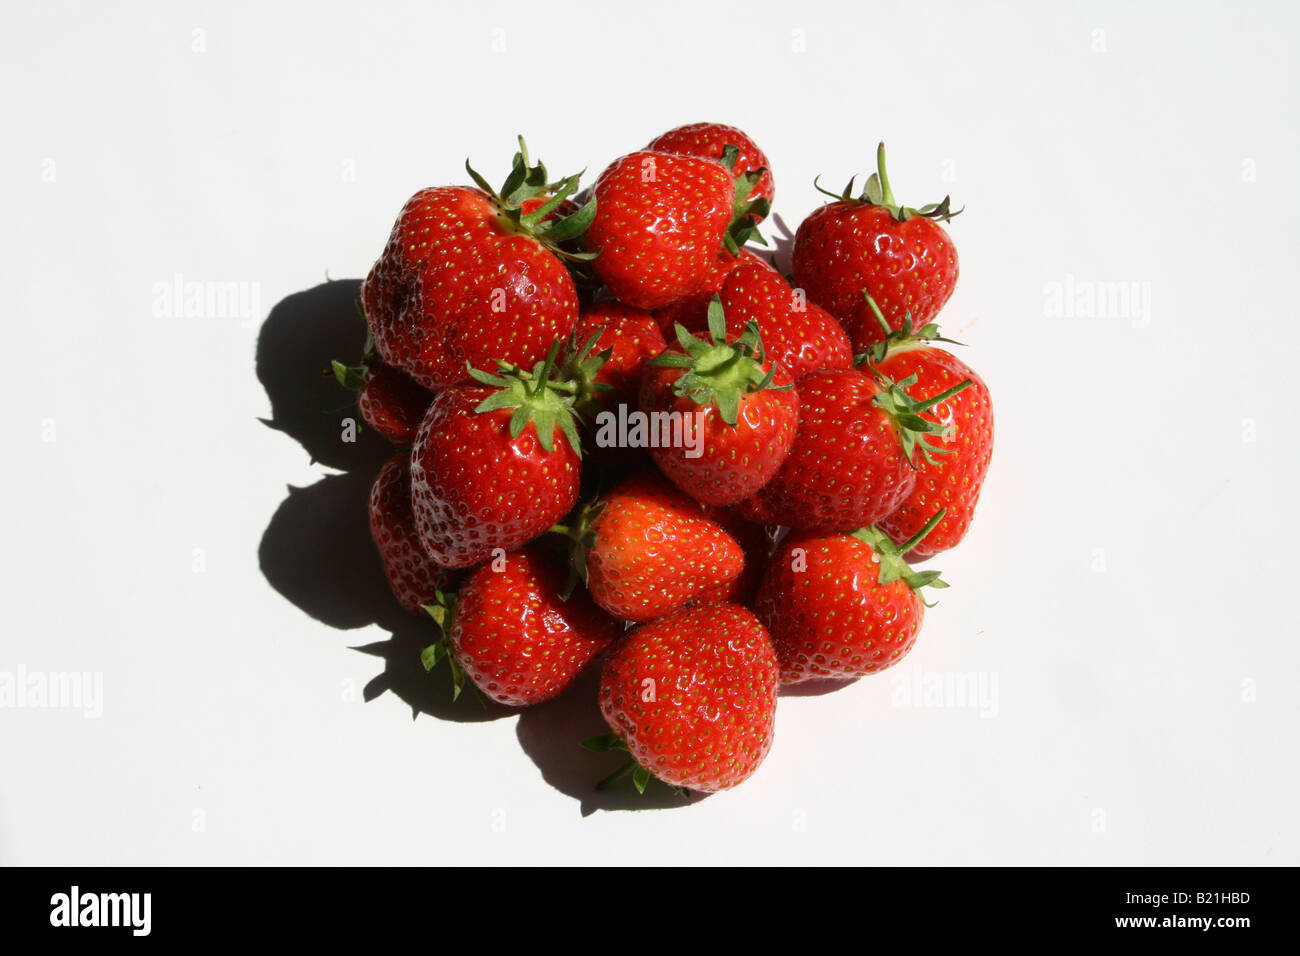 A pile of strawberries Stock Photo